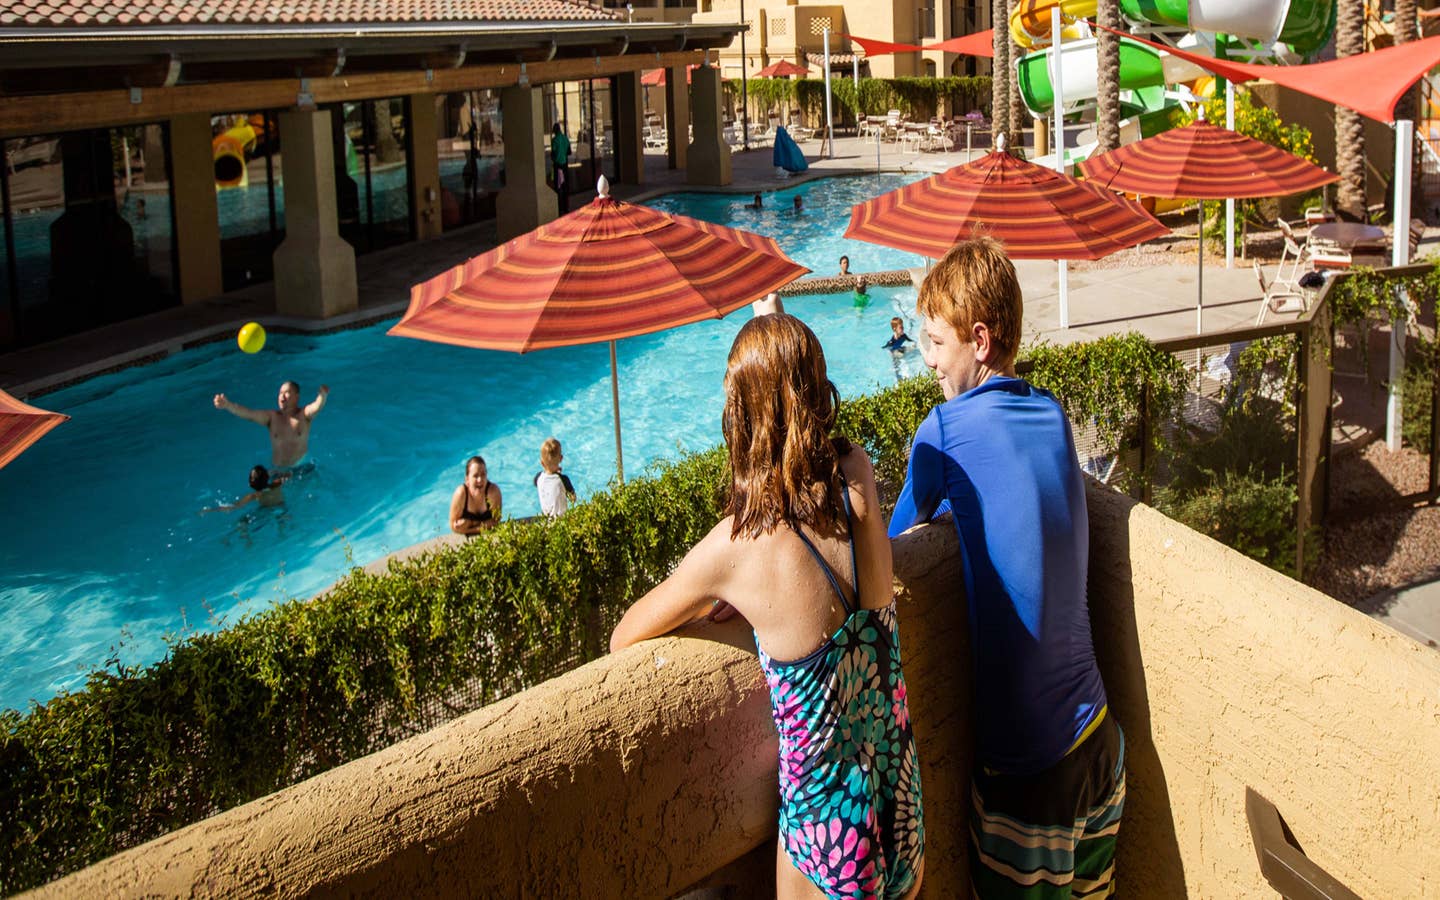 Two kids looking at pool and waterslide from balcony at Scottsdale Resort in Arizona.